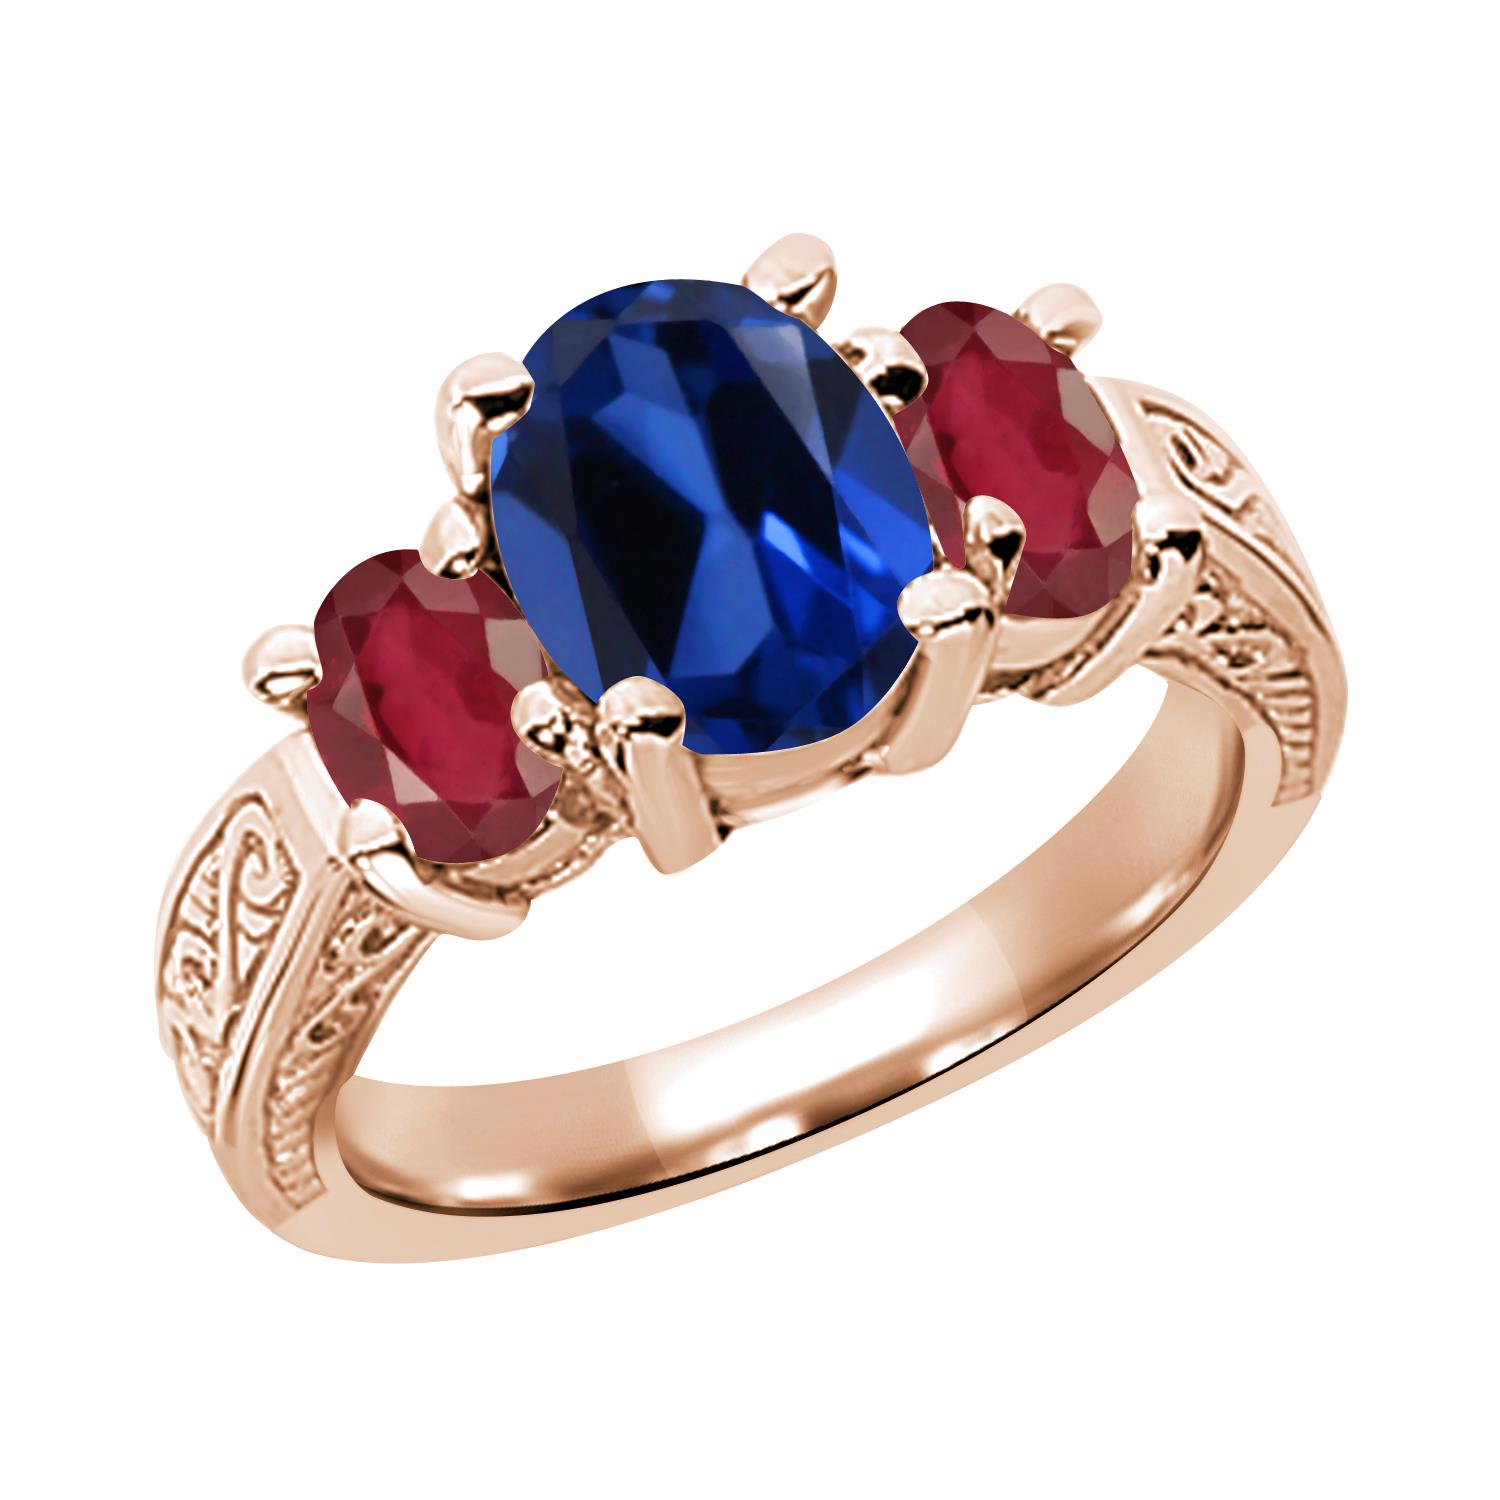 3.45 Ct Oval Blue Simulated Sapphire African Red Ruby 14K Rose Gold 3 Stone Ring